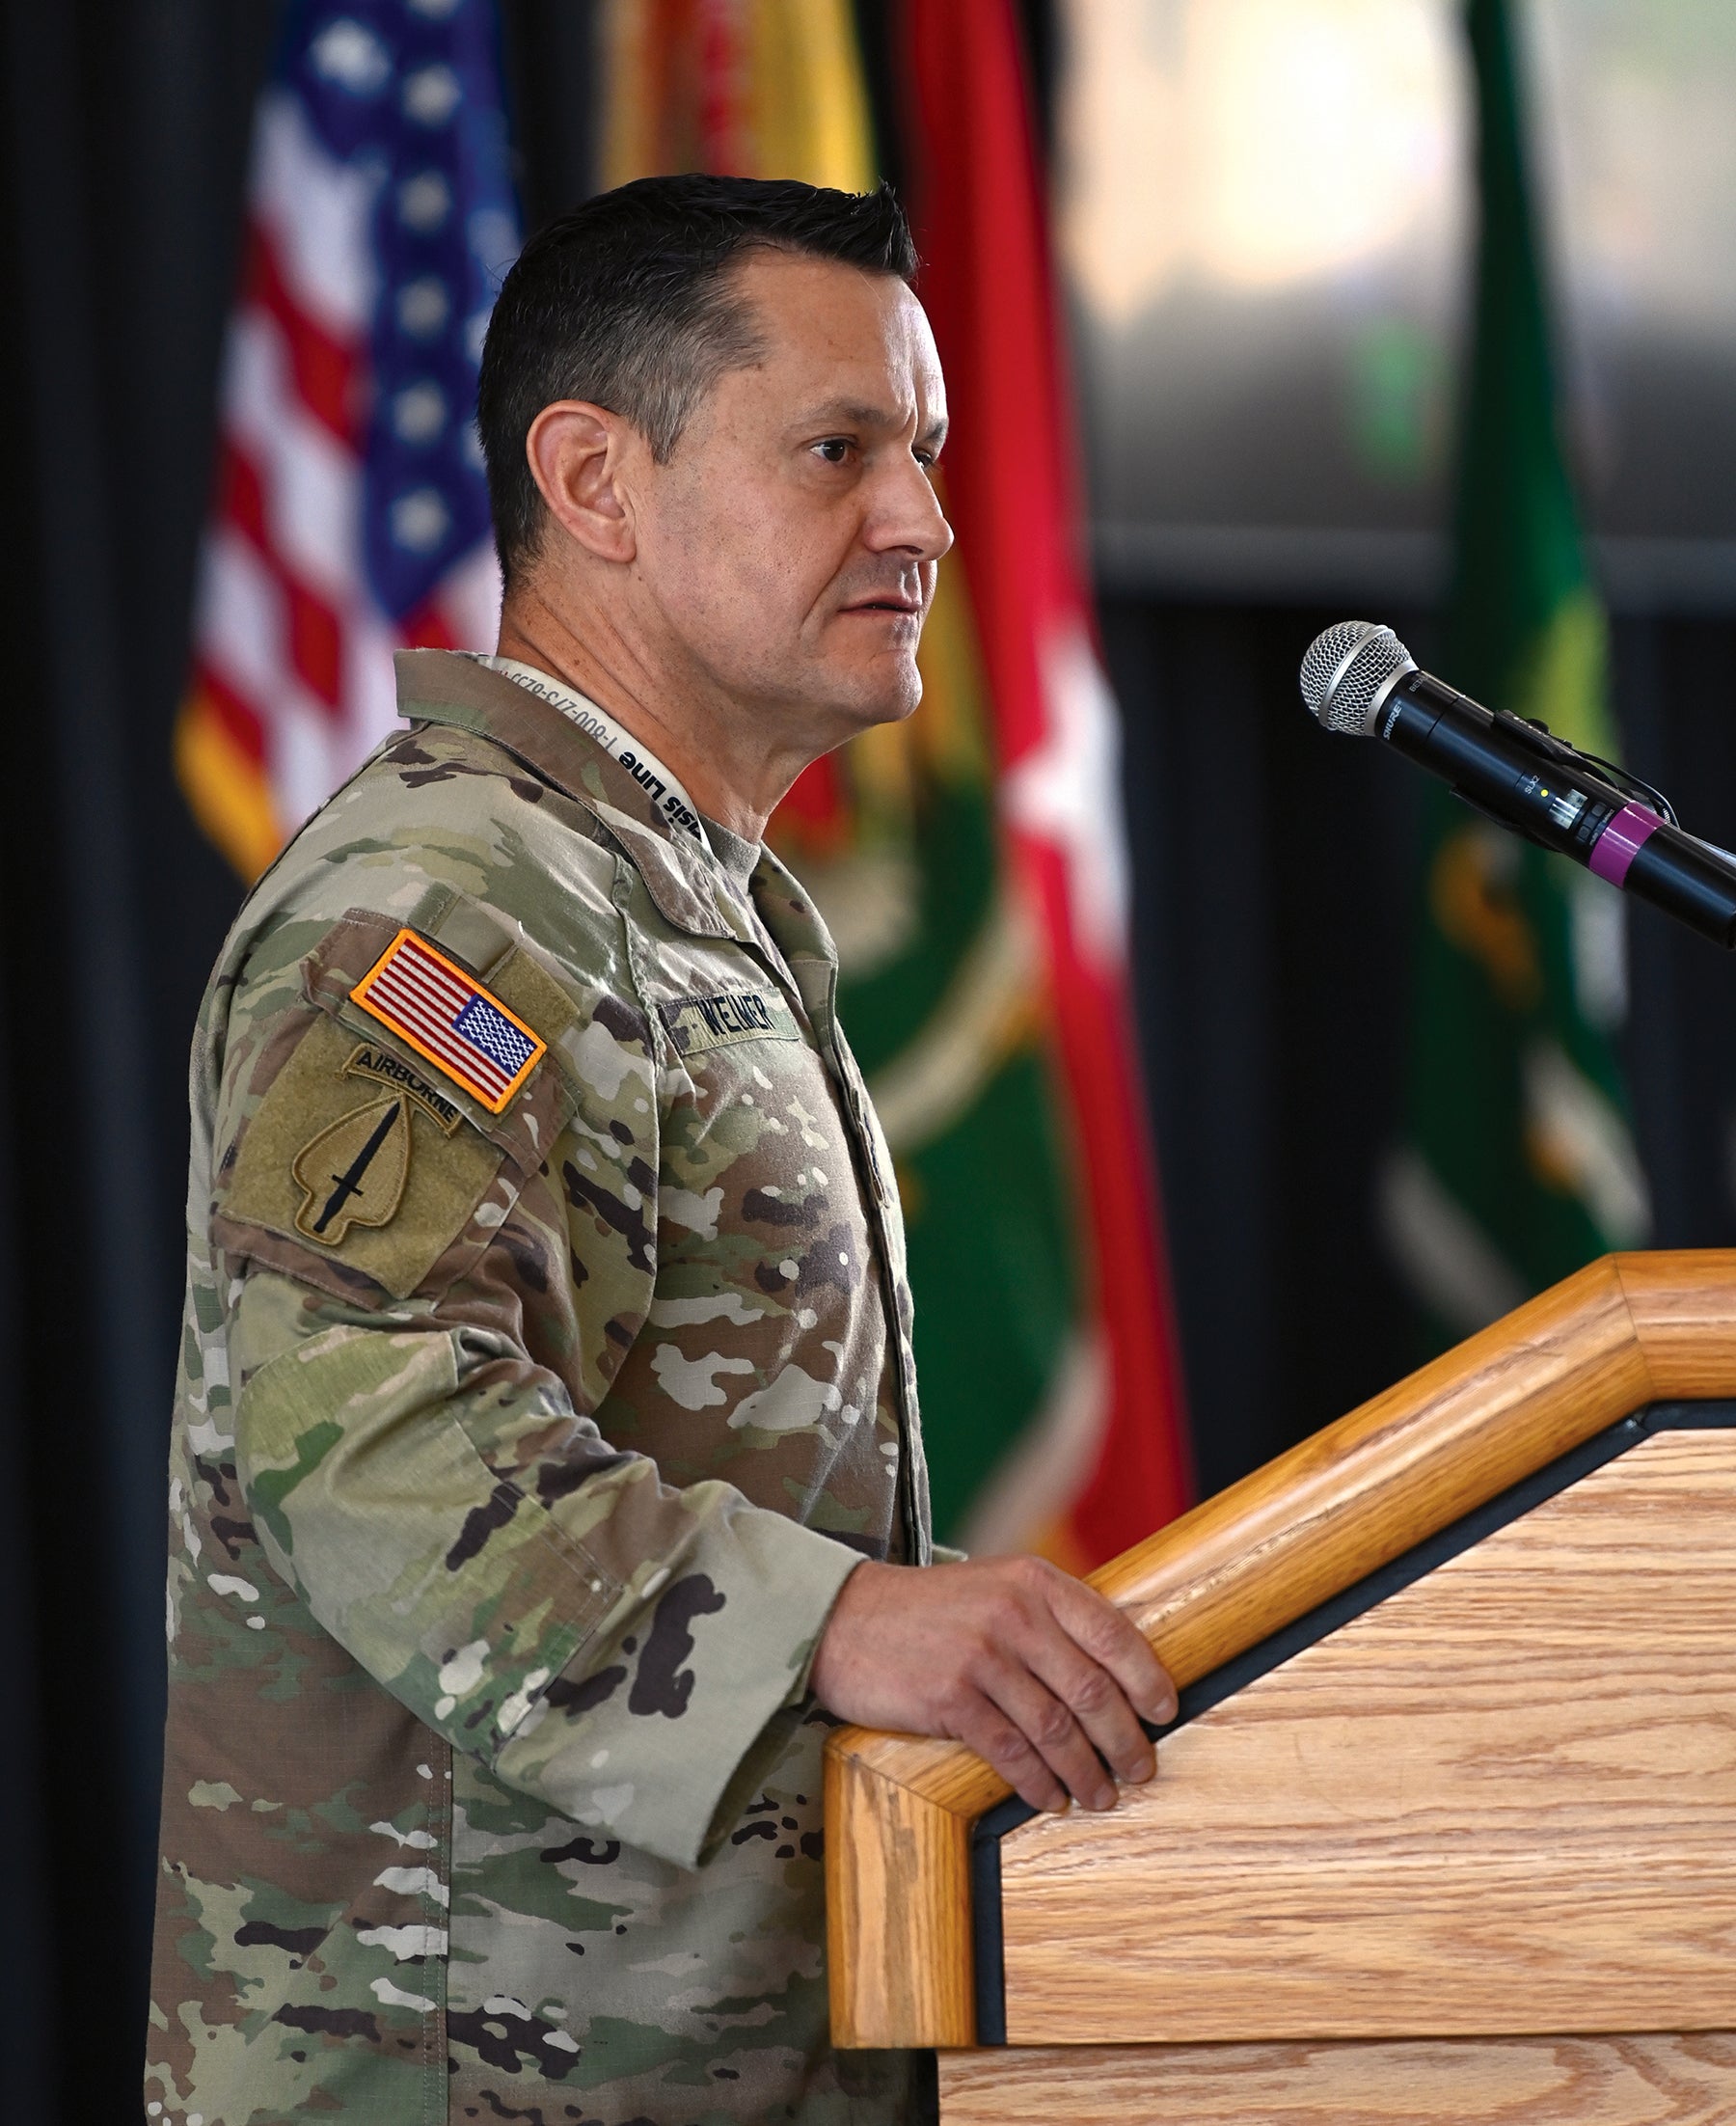 Then-Command Sgt. Maj. Michael Weimer, the next sergeant major of the Army, speaks during an event at Fort Bragg, now Fort Liberty, North Carolina. (Credit: U.S. Army/K. Kassens)